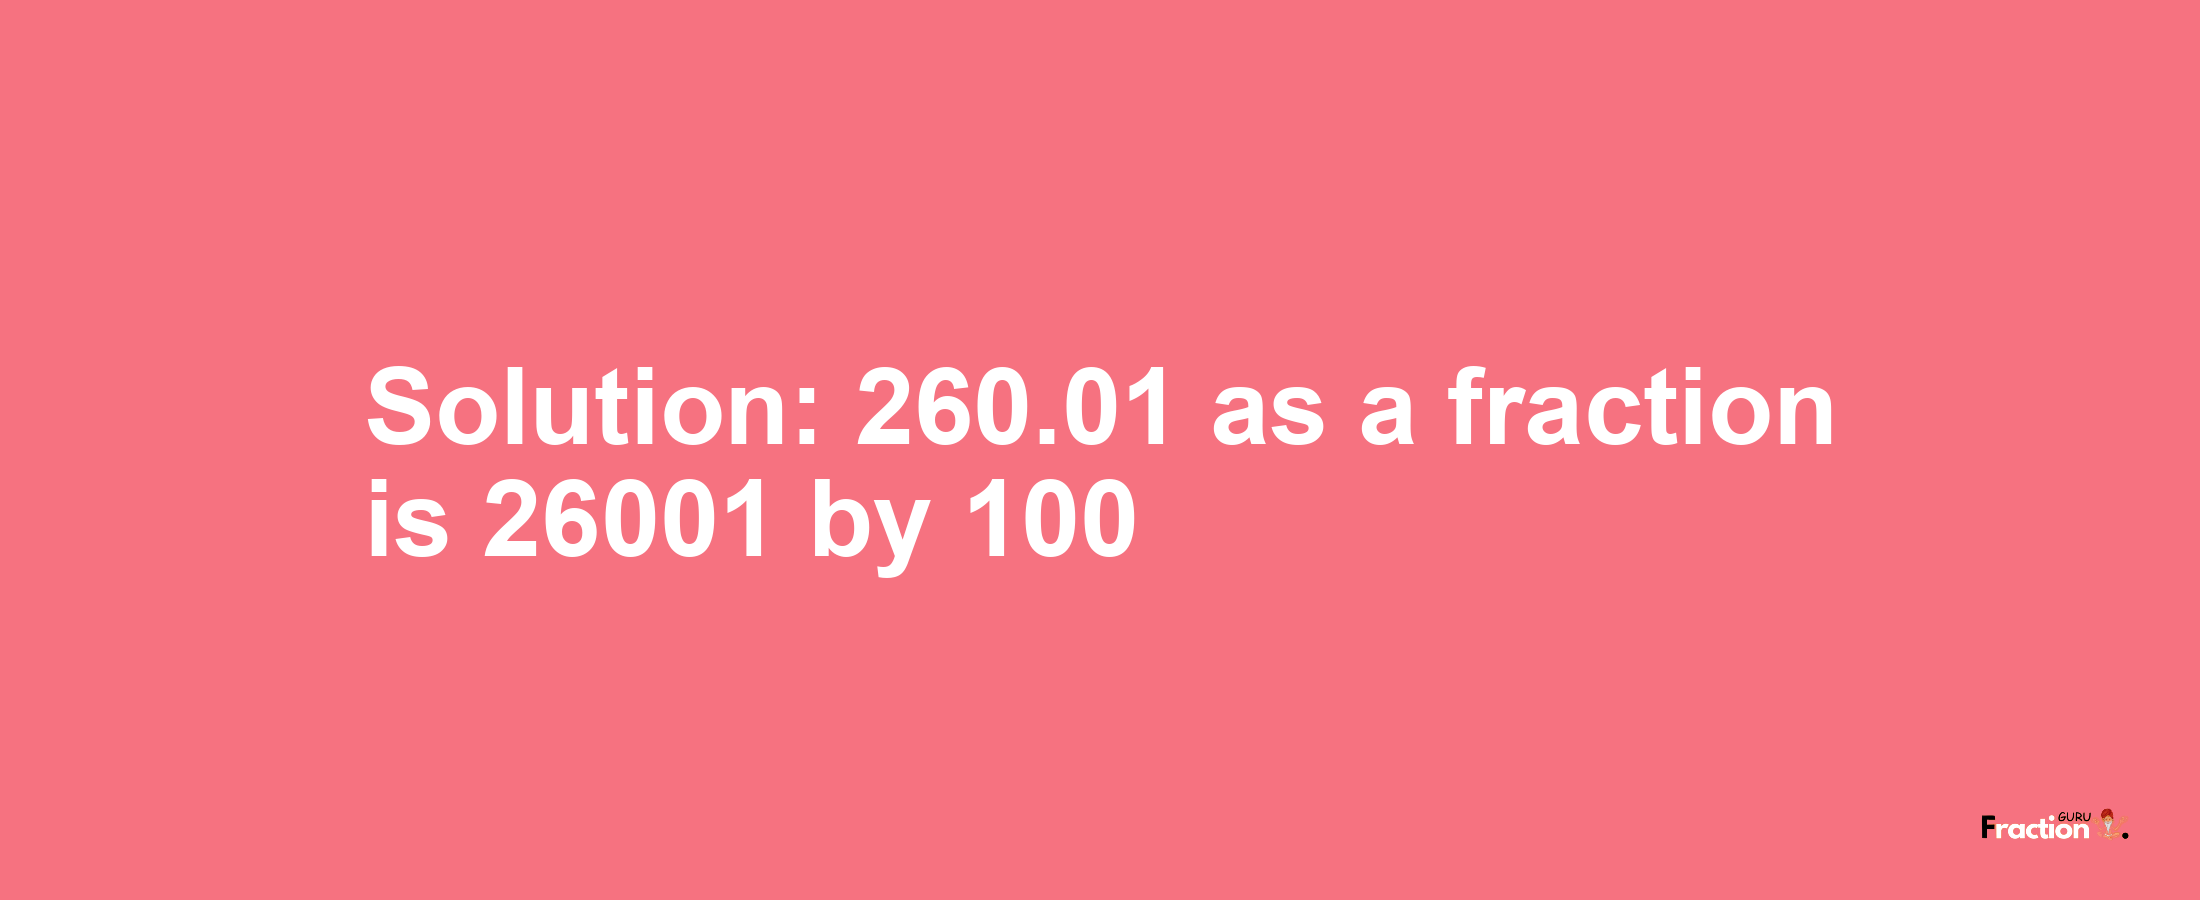 Solution:260.01 as a fraction is 26001/100